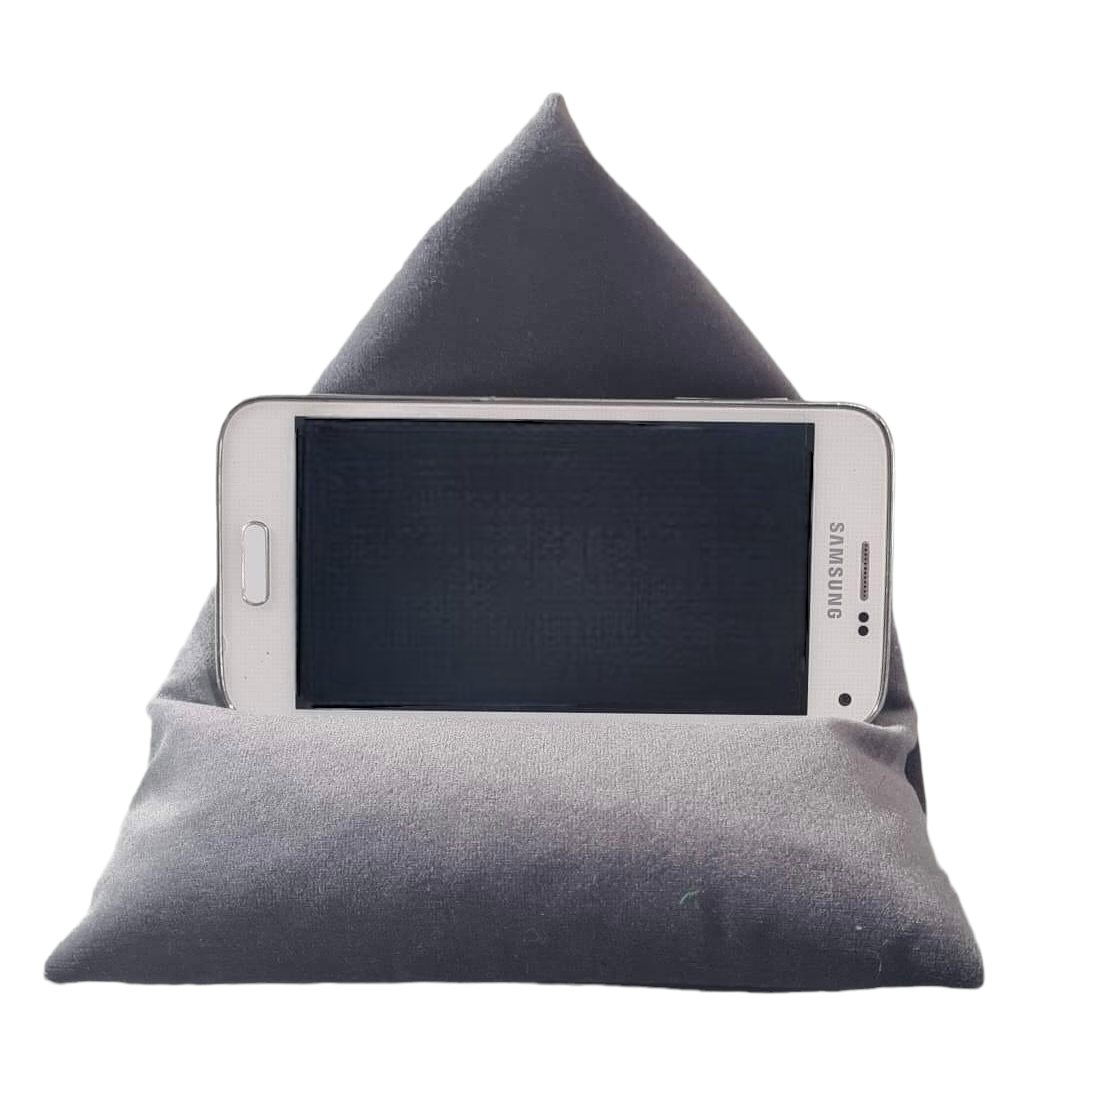 Lazy Phone Pillow Accessibility Equipment SPIRIT SPARKPLUGS BY DESIGN Up-Cycled Cotton Fabric  